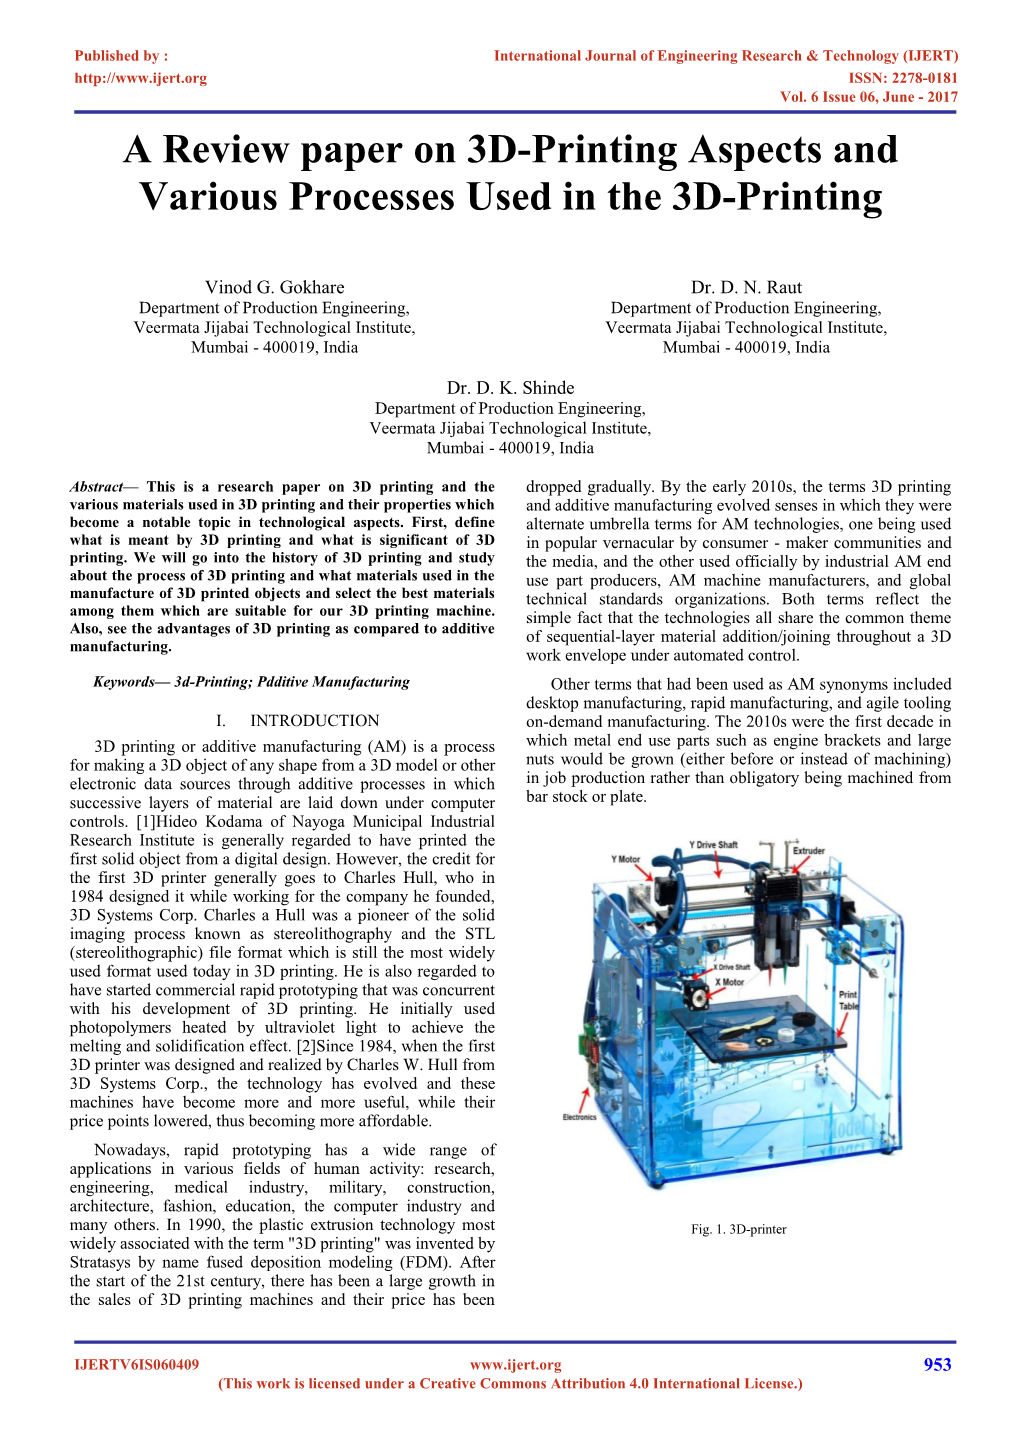 A Review Paper on 3D-Printing Aspects and Various Processes Used in the 3D-Printing